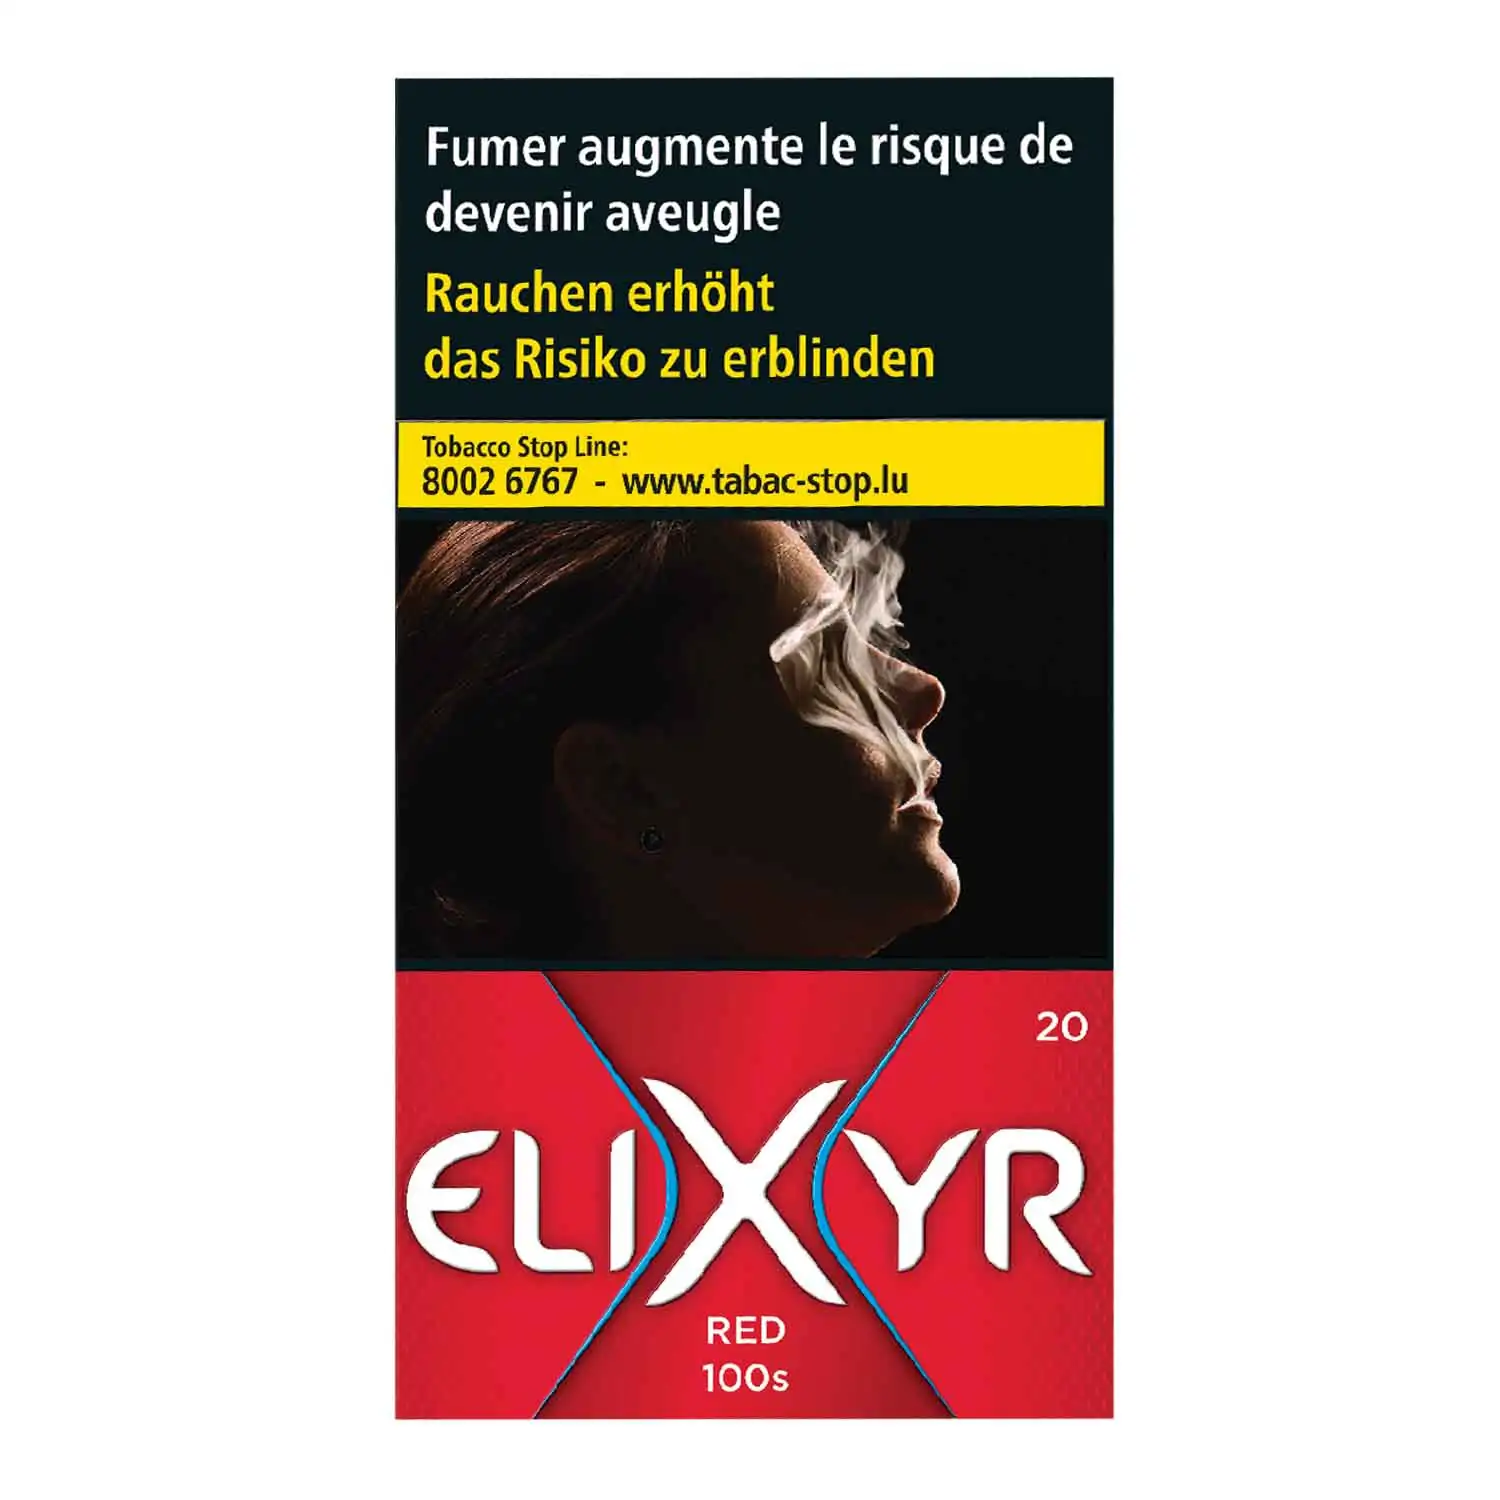 Elixyr rouge 100's 20 - Buy at Real Tobacco